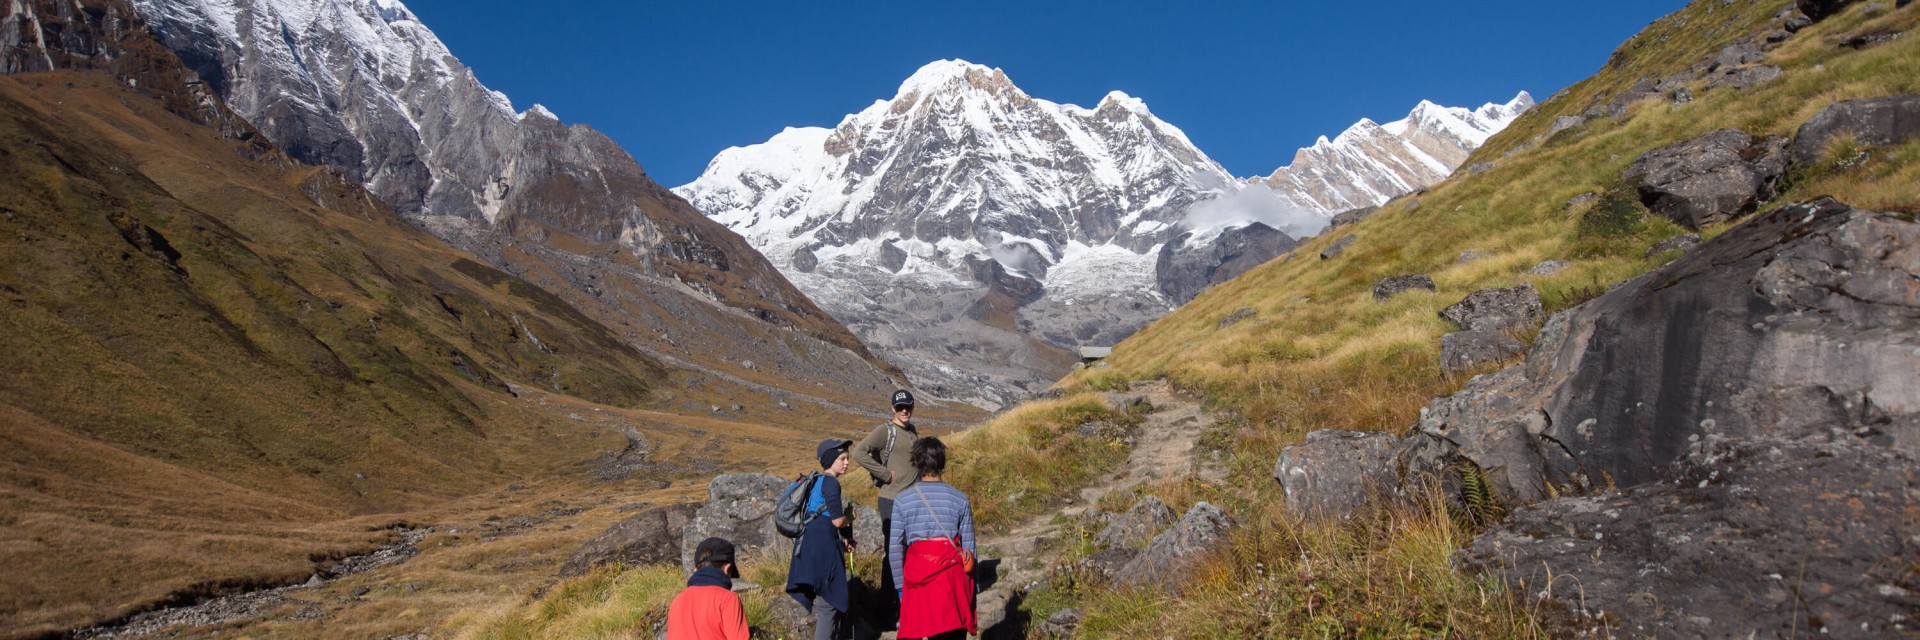 A family trekkers approaching annapurna base camp